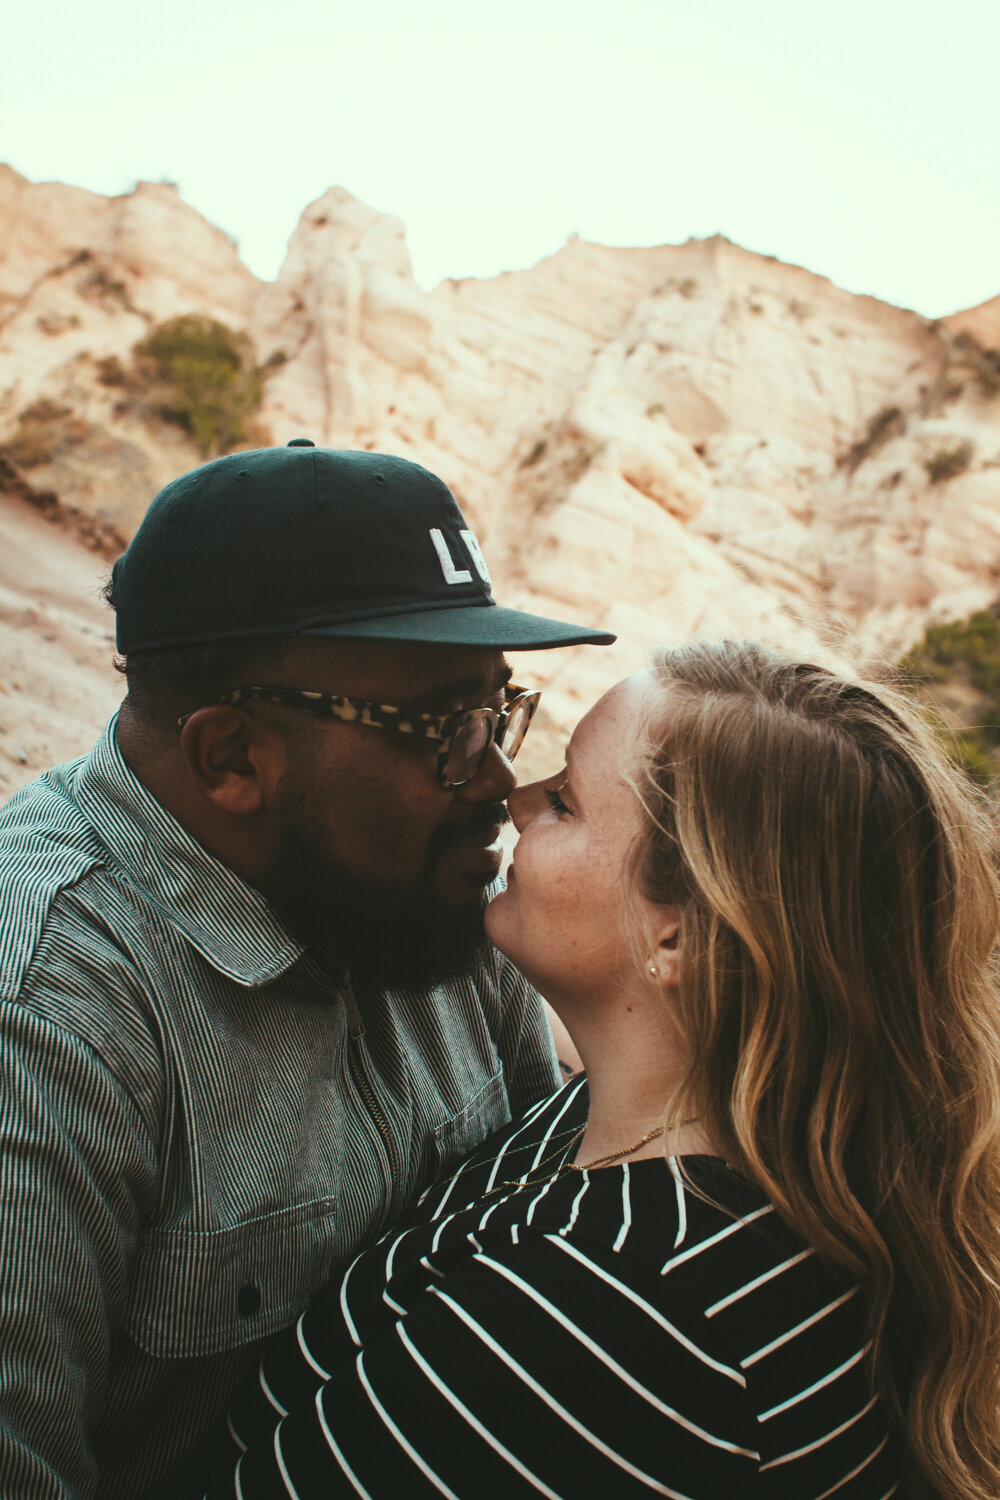 engagement engaged photography photographe marriage wedding photographer corse corsica california desert foothill ranch whiting lifestyle Anza Creative-24.jpg